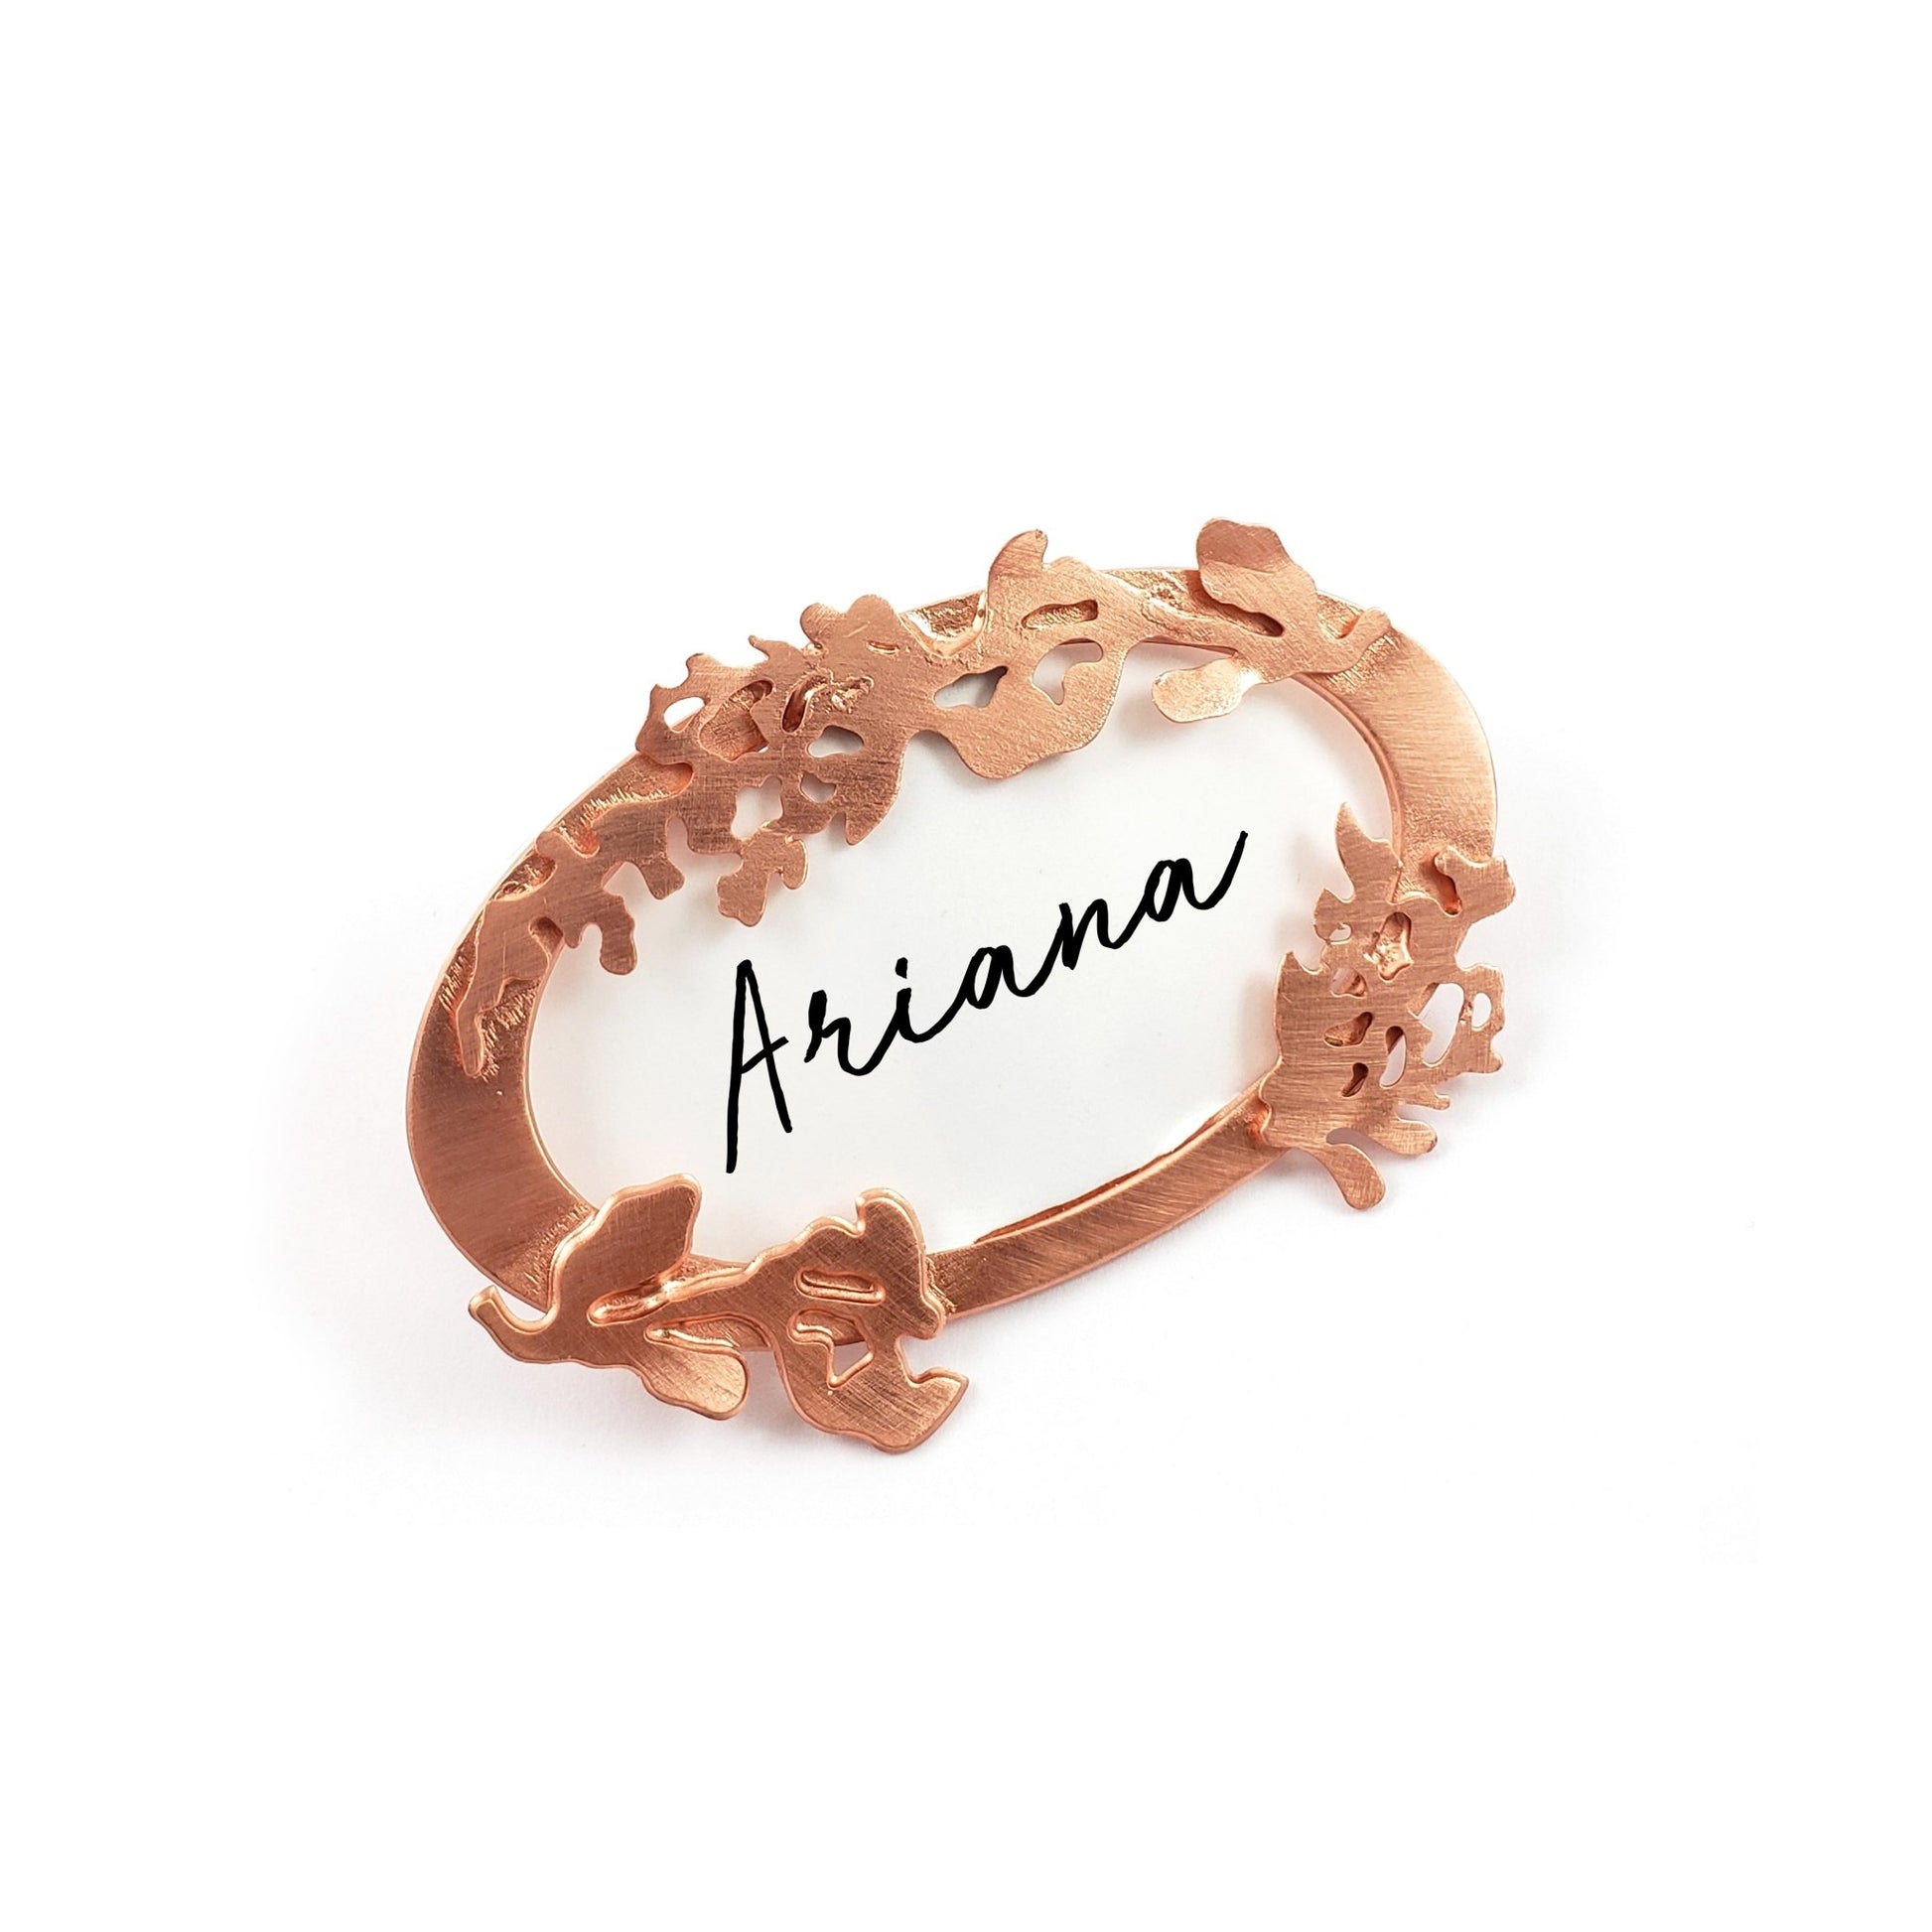 Floral Vines Place Card Holder - Ariana Ost